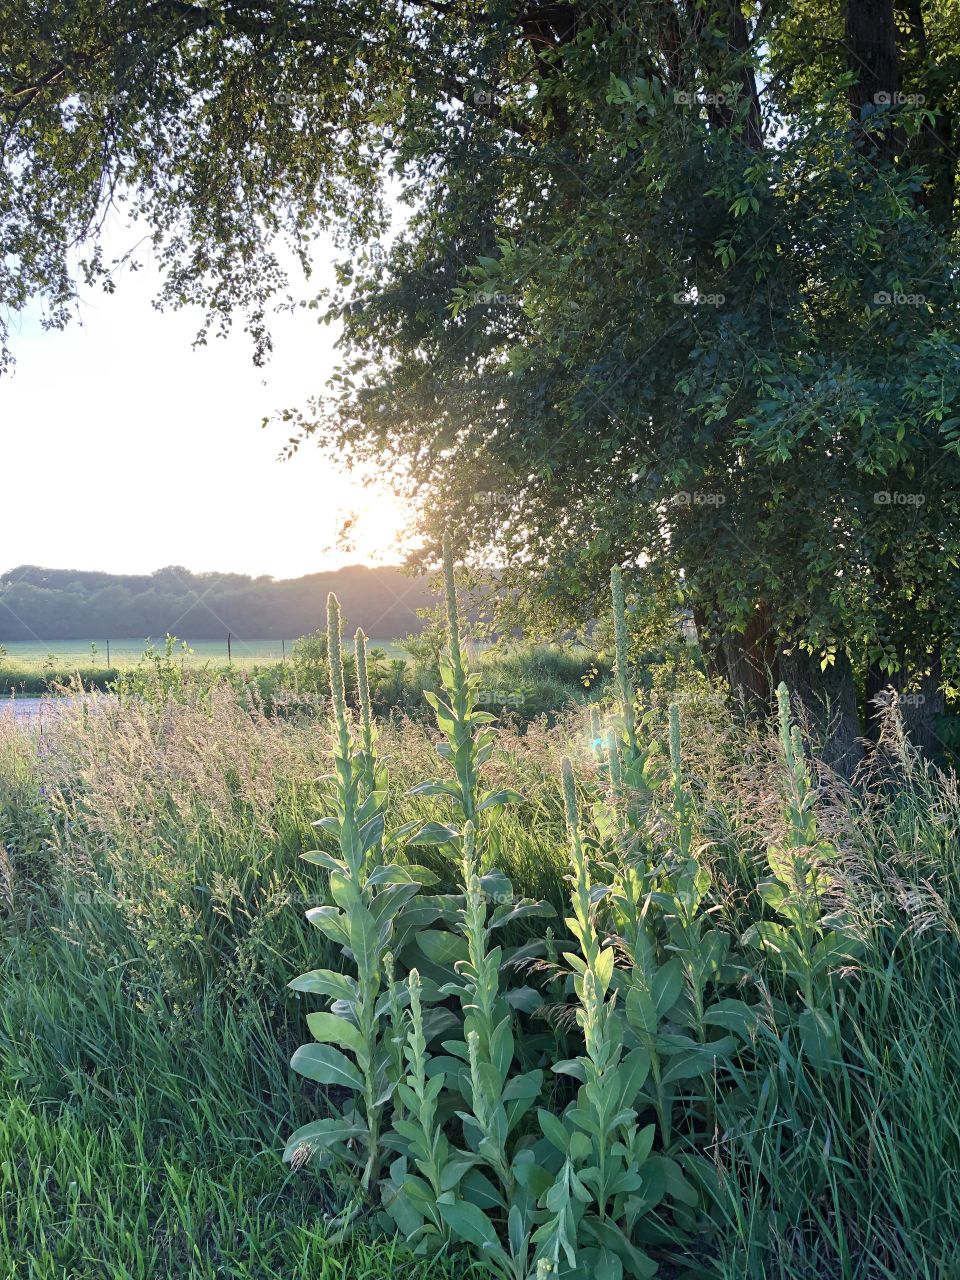 Sunset early light fading tall weeds and flowers before blooming 